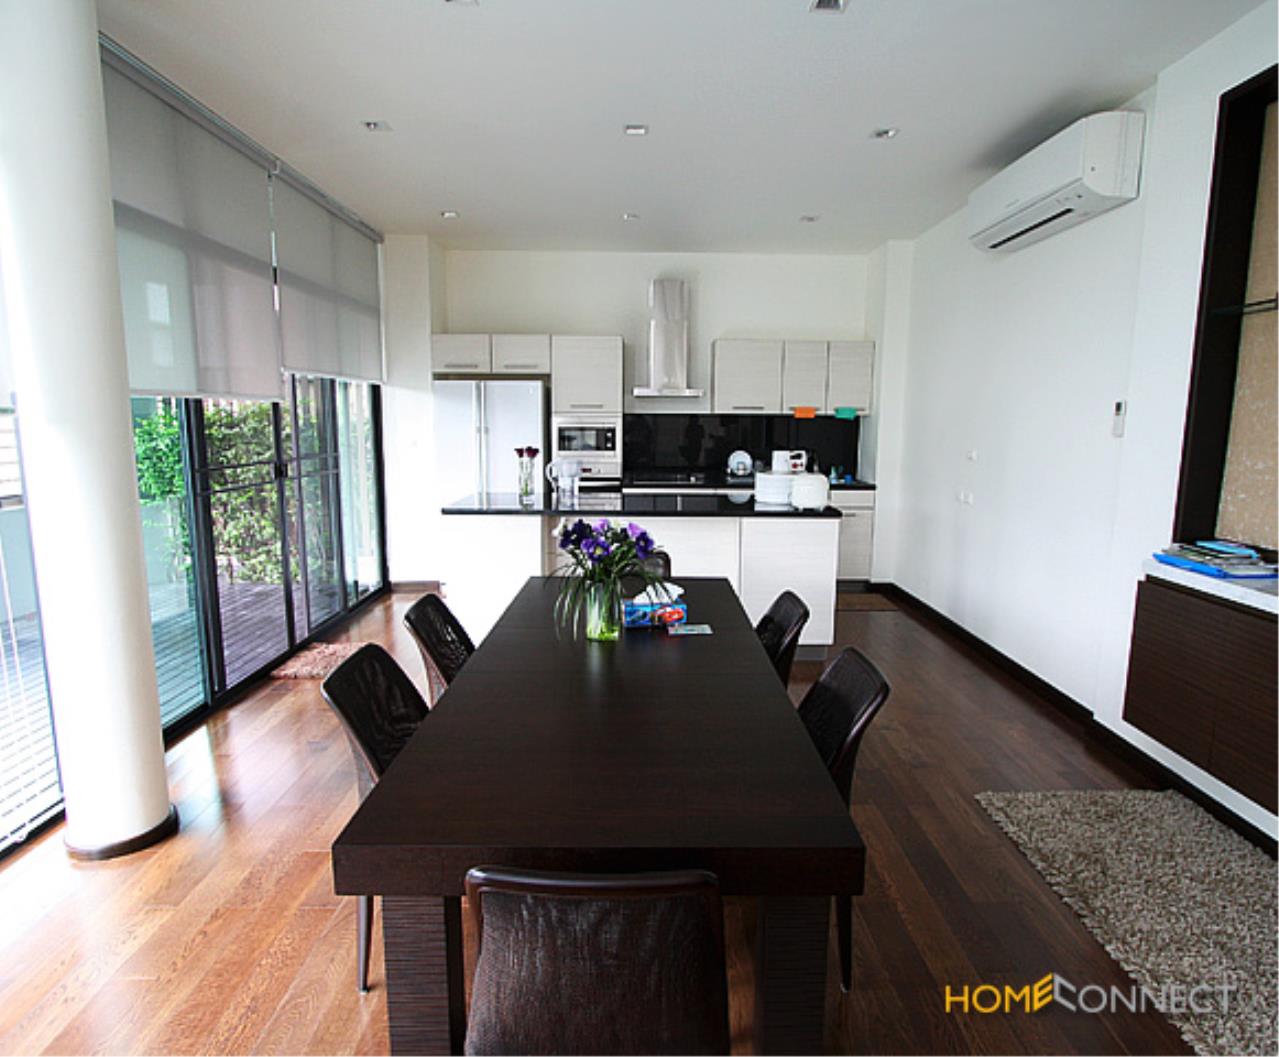 Home Connect Thailand Agency's House in Compound for Rent in Ekamai area 15